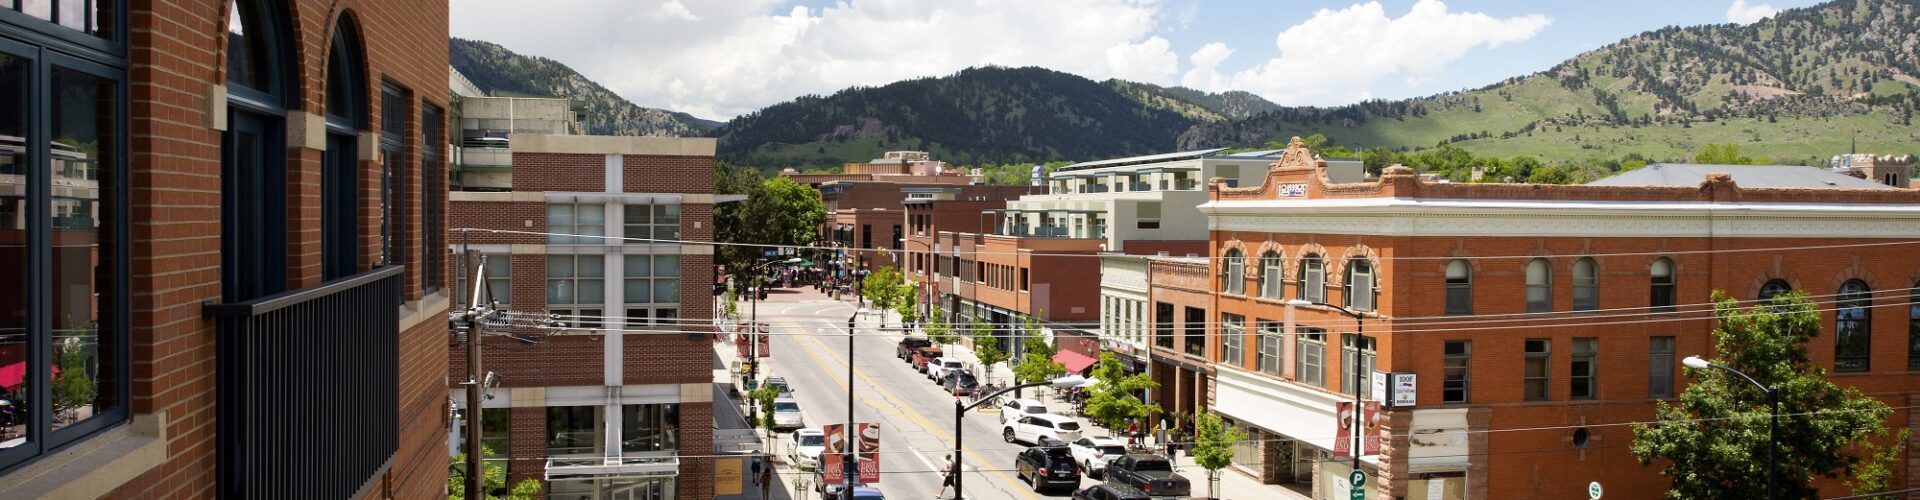 Aerial shot of Pearl Street in Downtown Boulder, featuring red brick buildings and the foothills in the background